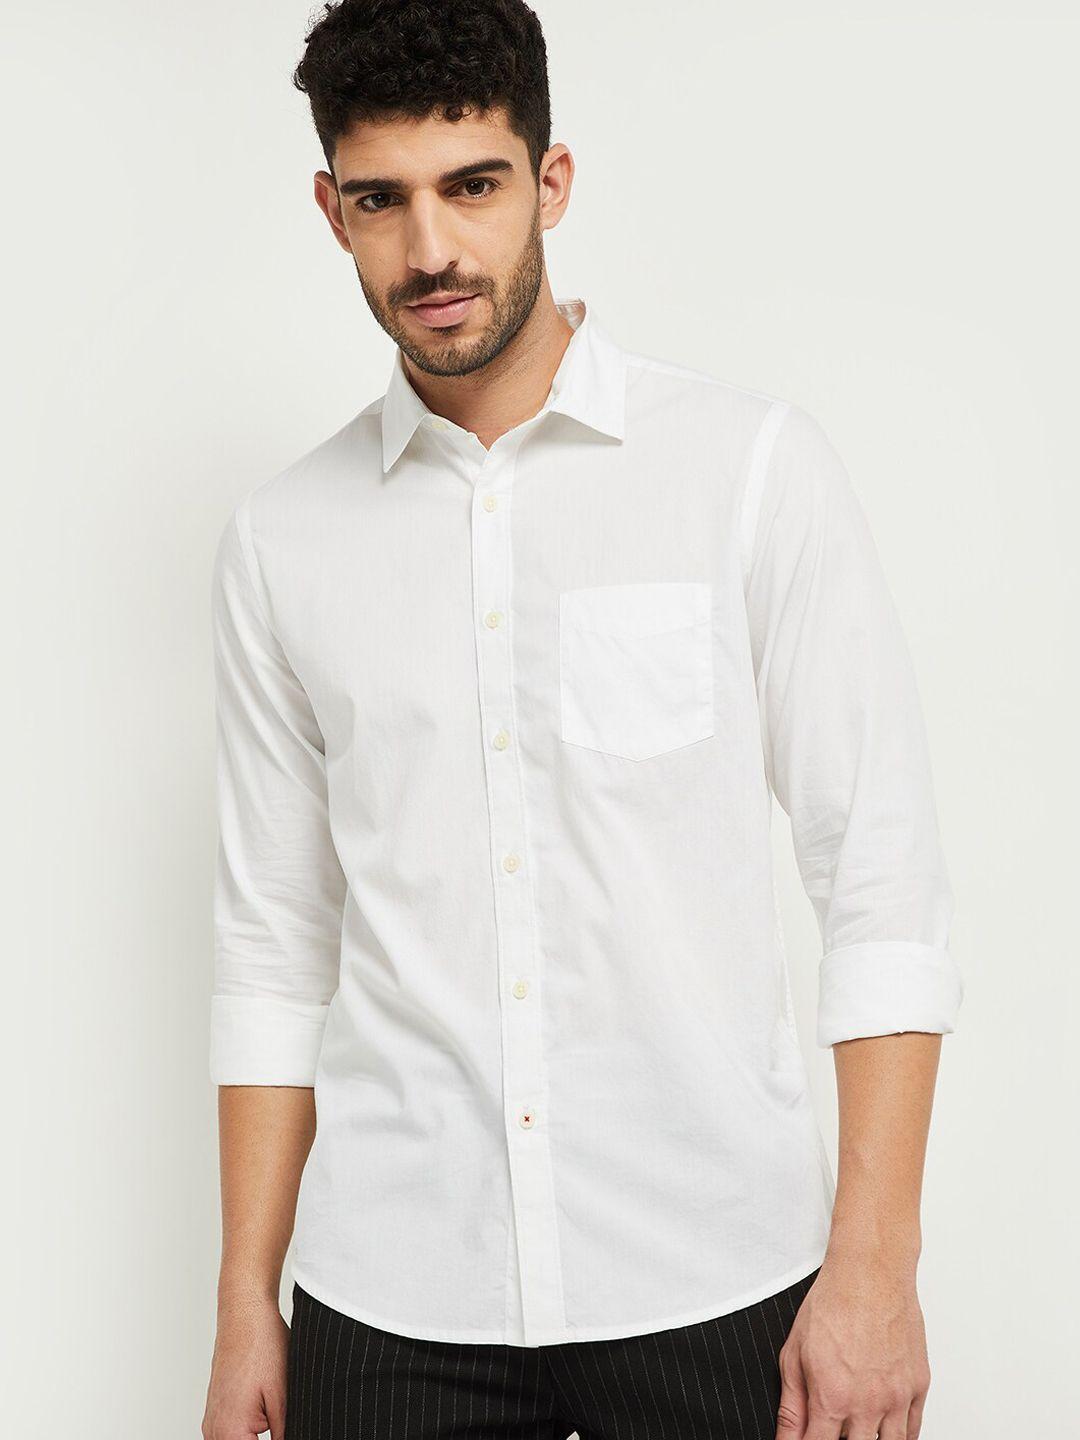 max men white slim fit opaque casual shirt